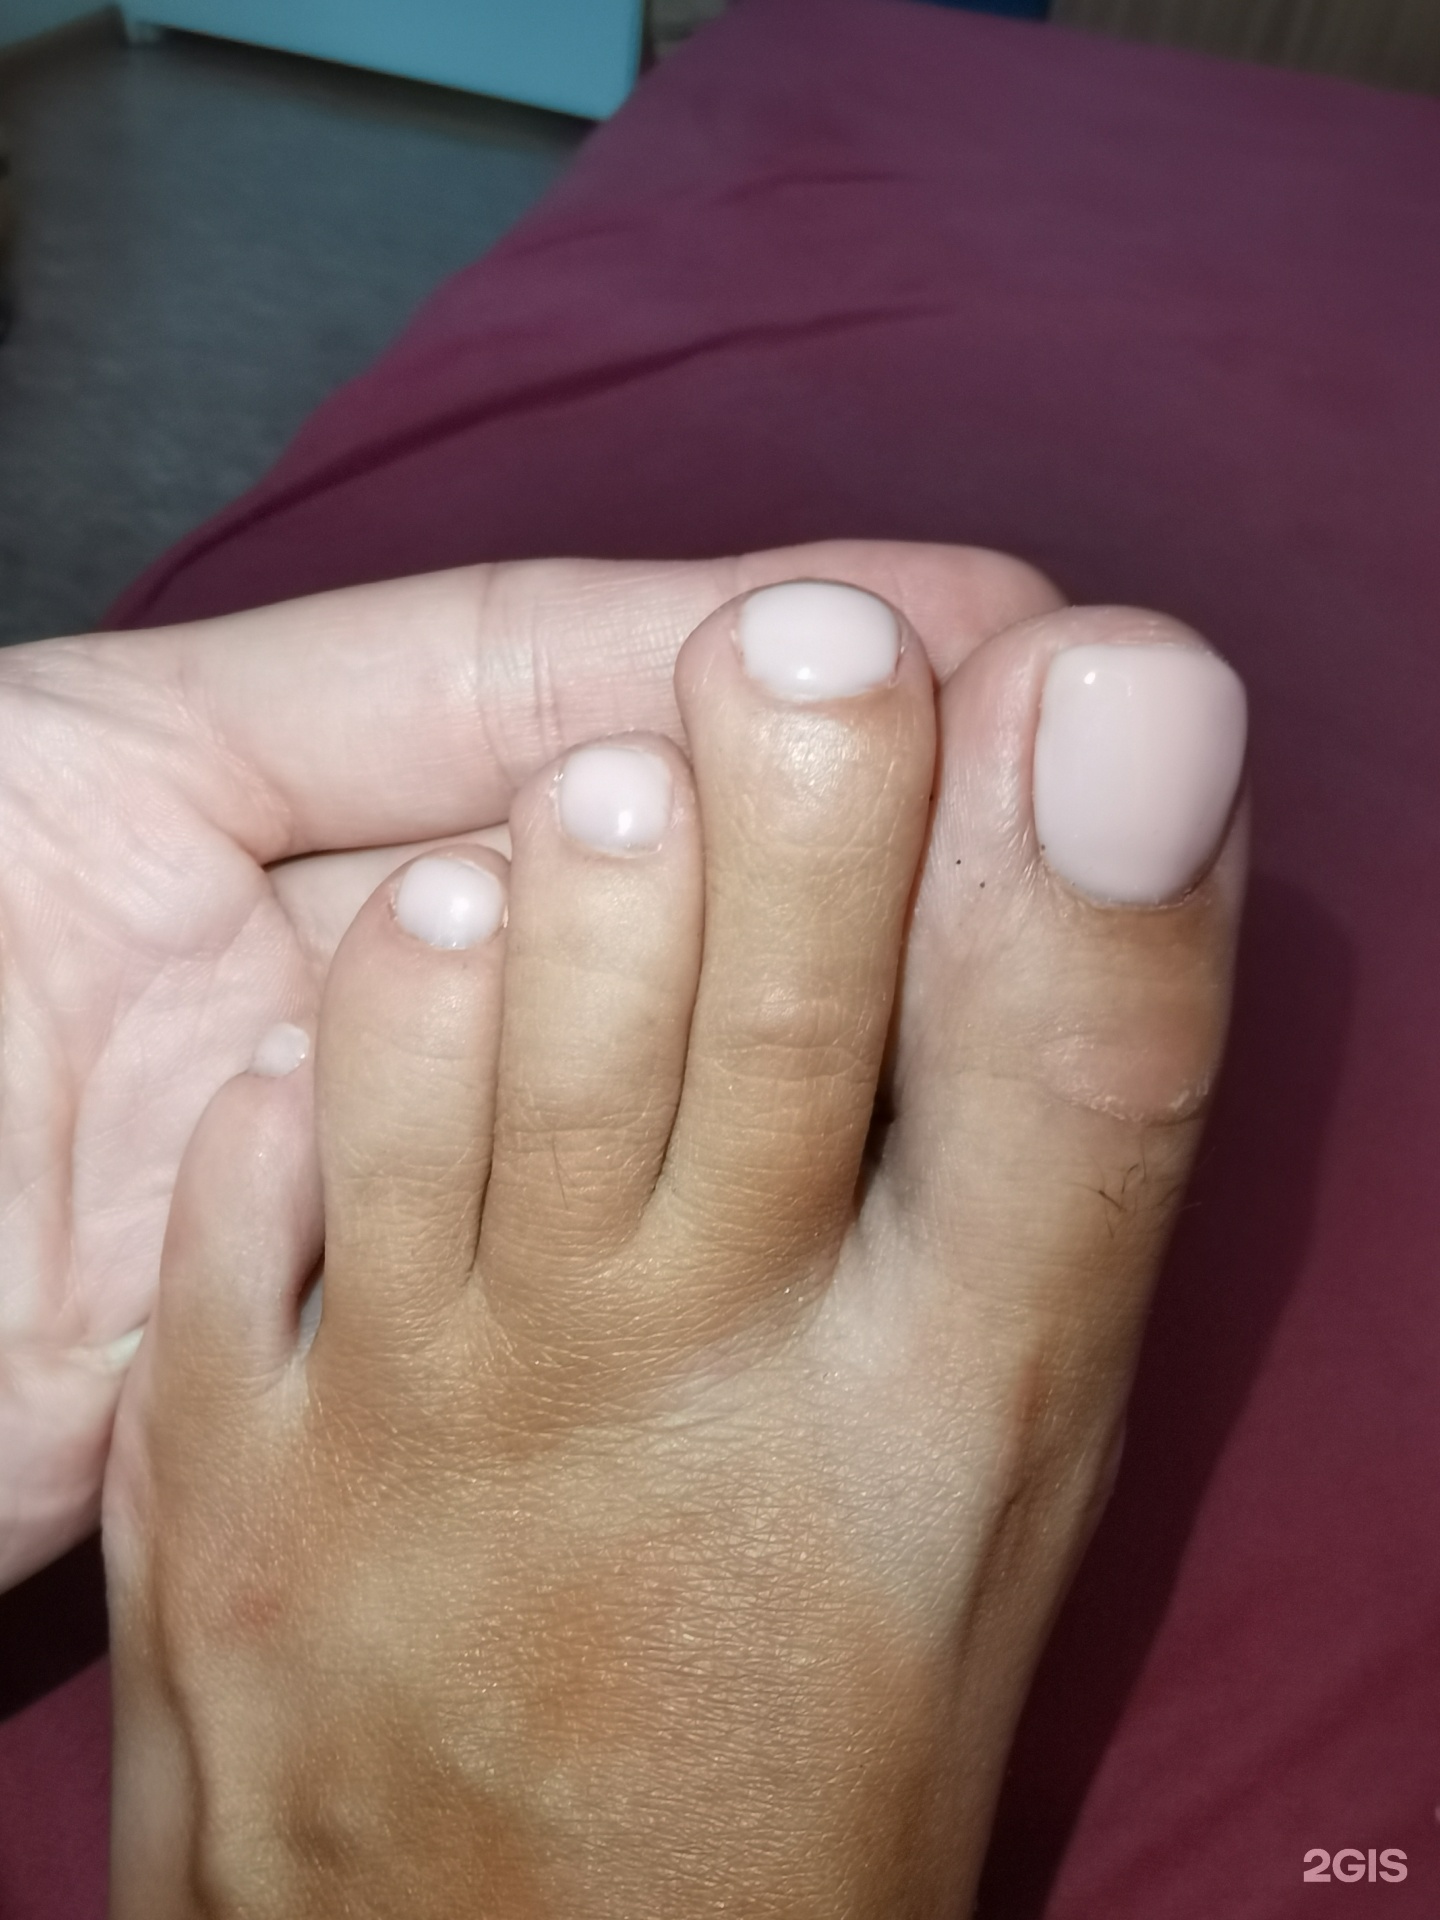 At My Wife's Feet